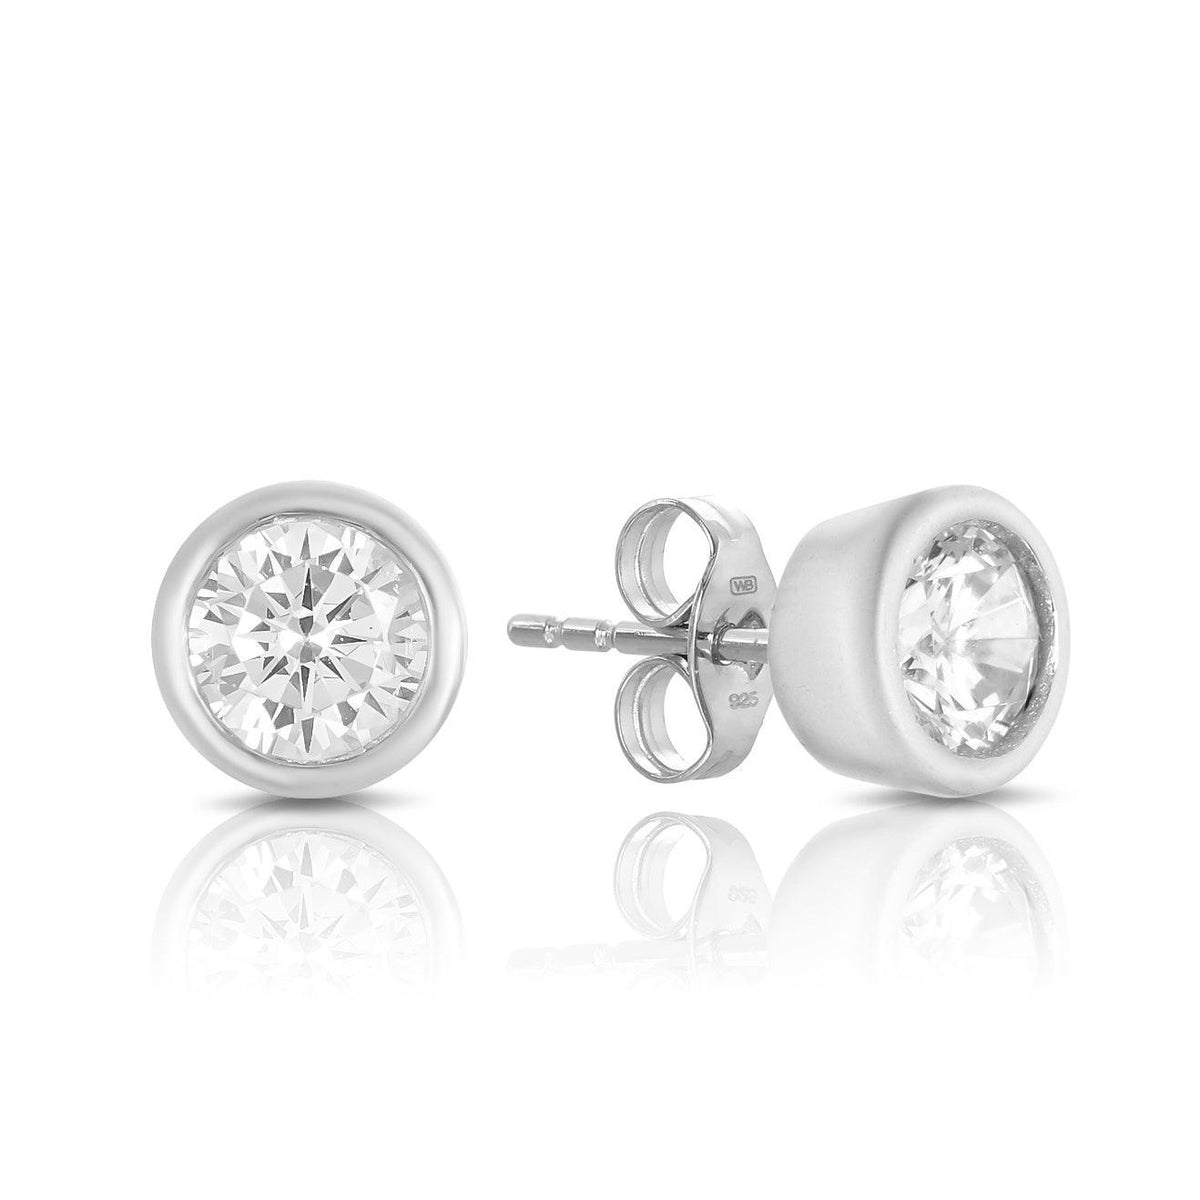 Round Cubic Zirconia Stud Earrings in Sterling Silver - Wallace Bishop